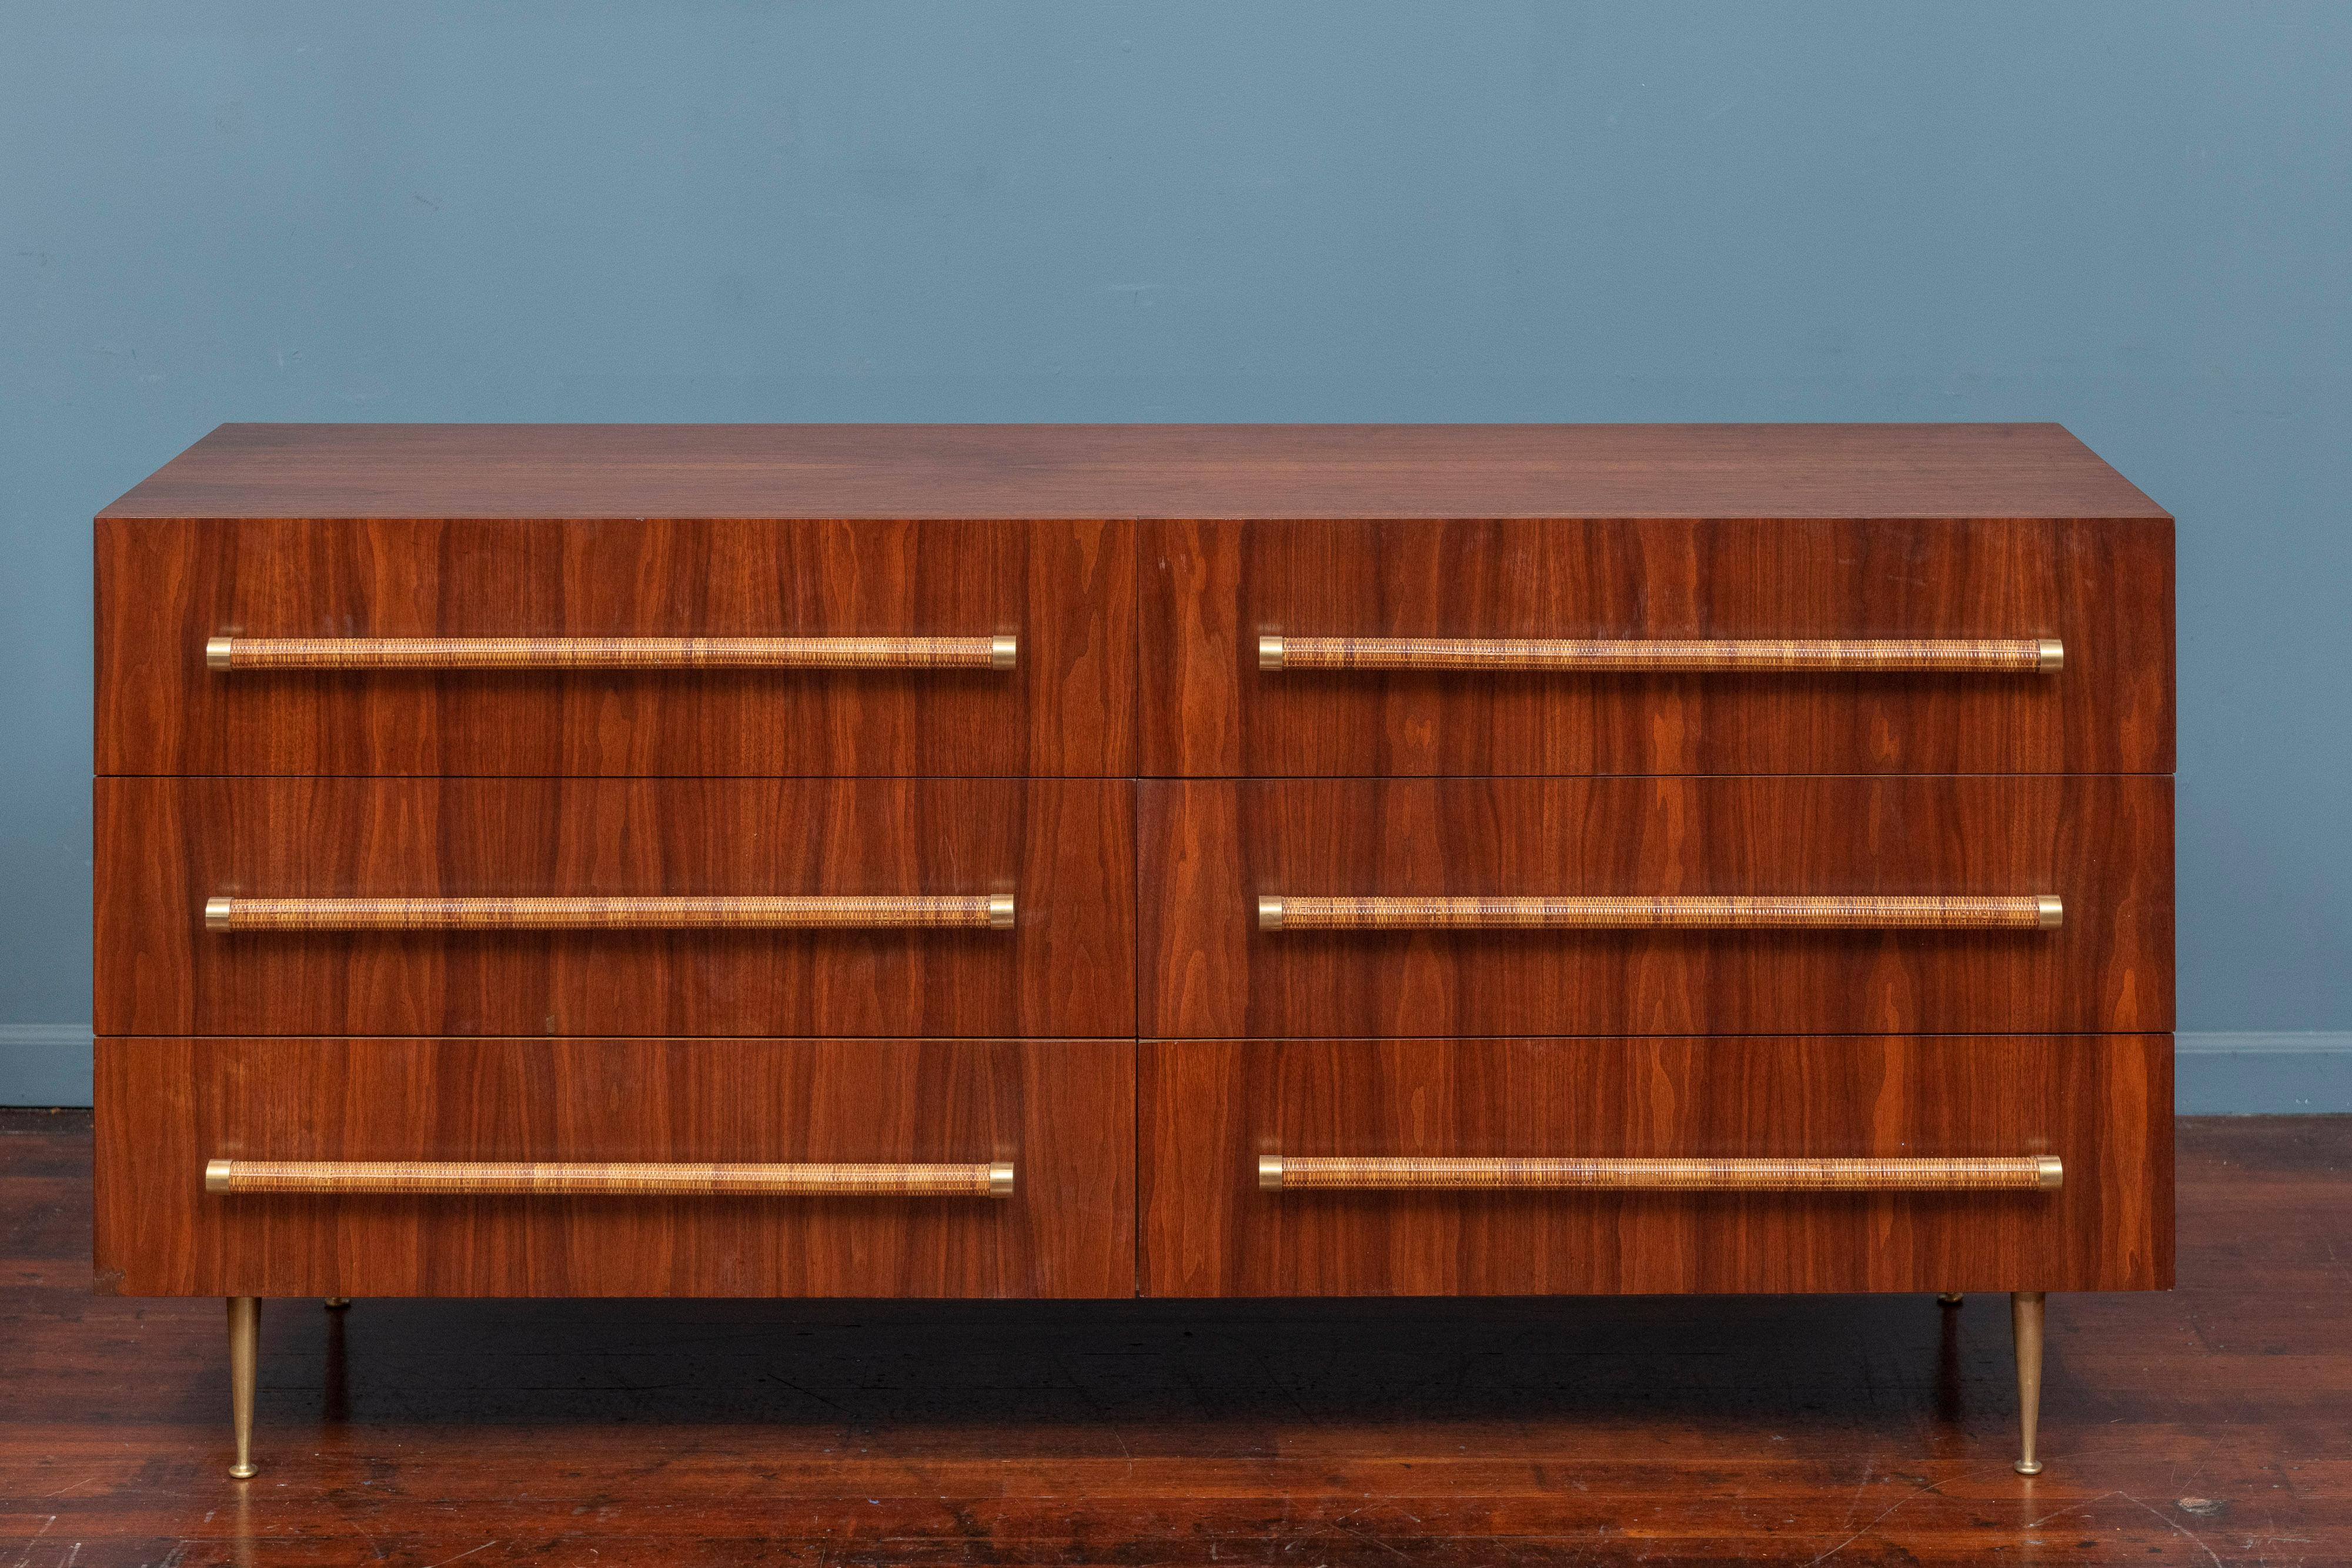 T.H. Robsjohn-Gibbings design dresser for Widdicomb, U.S.A. High quality construction using a figurative walnut veneered exterior and solid oak drawers with cane wrapped pulls on solid brass legs. All six drawers open and close smoothly and are